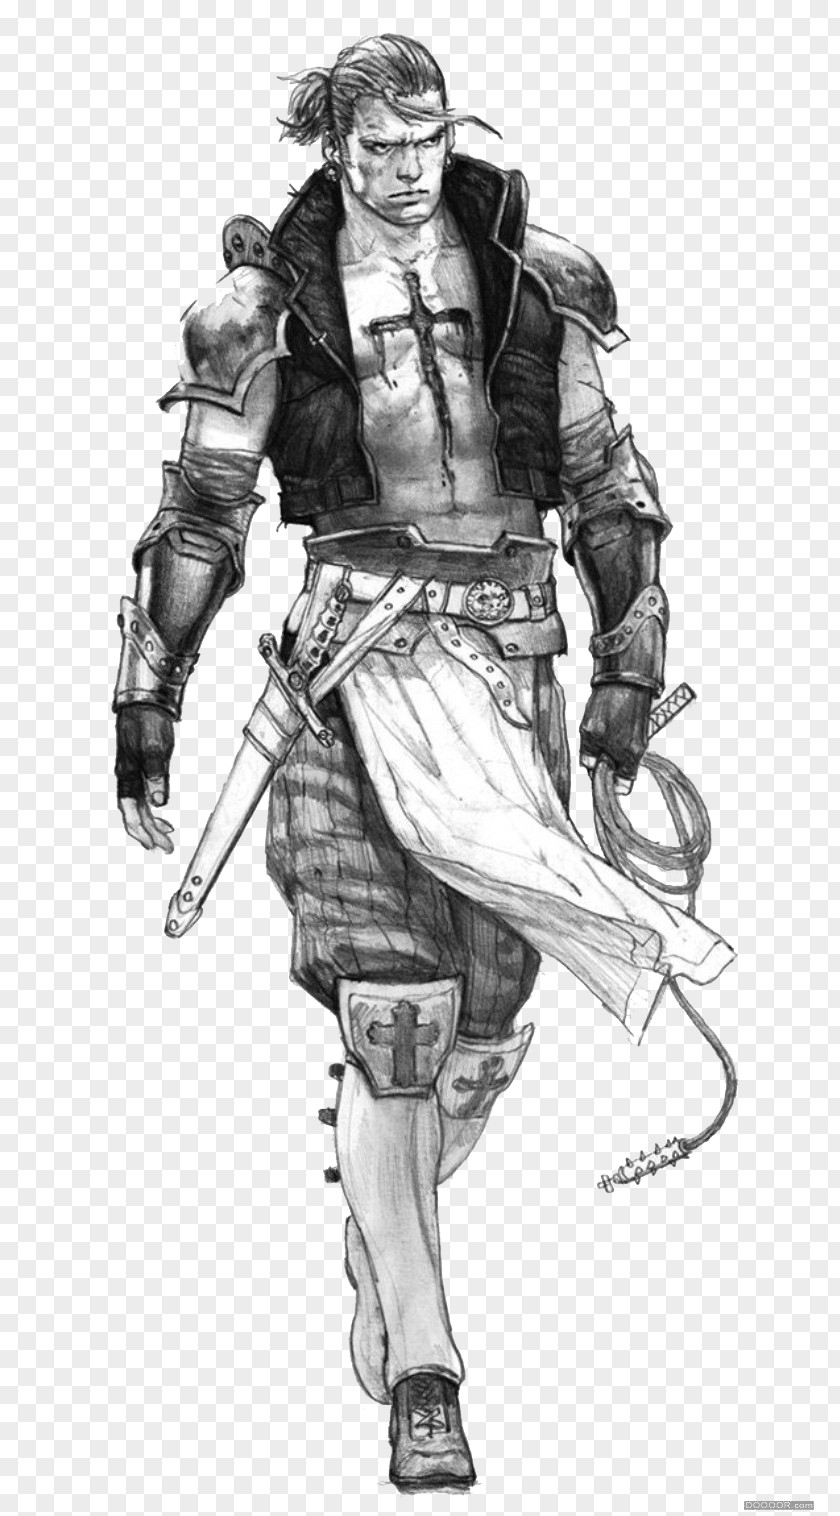 Black And White Cool Armor Warrior Visual Arts Drawing Work Of Art Illustration PNG